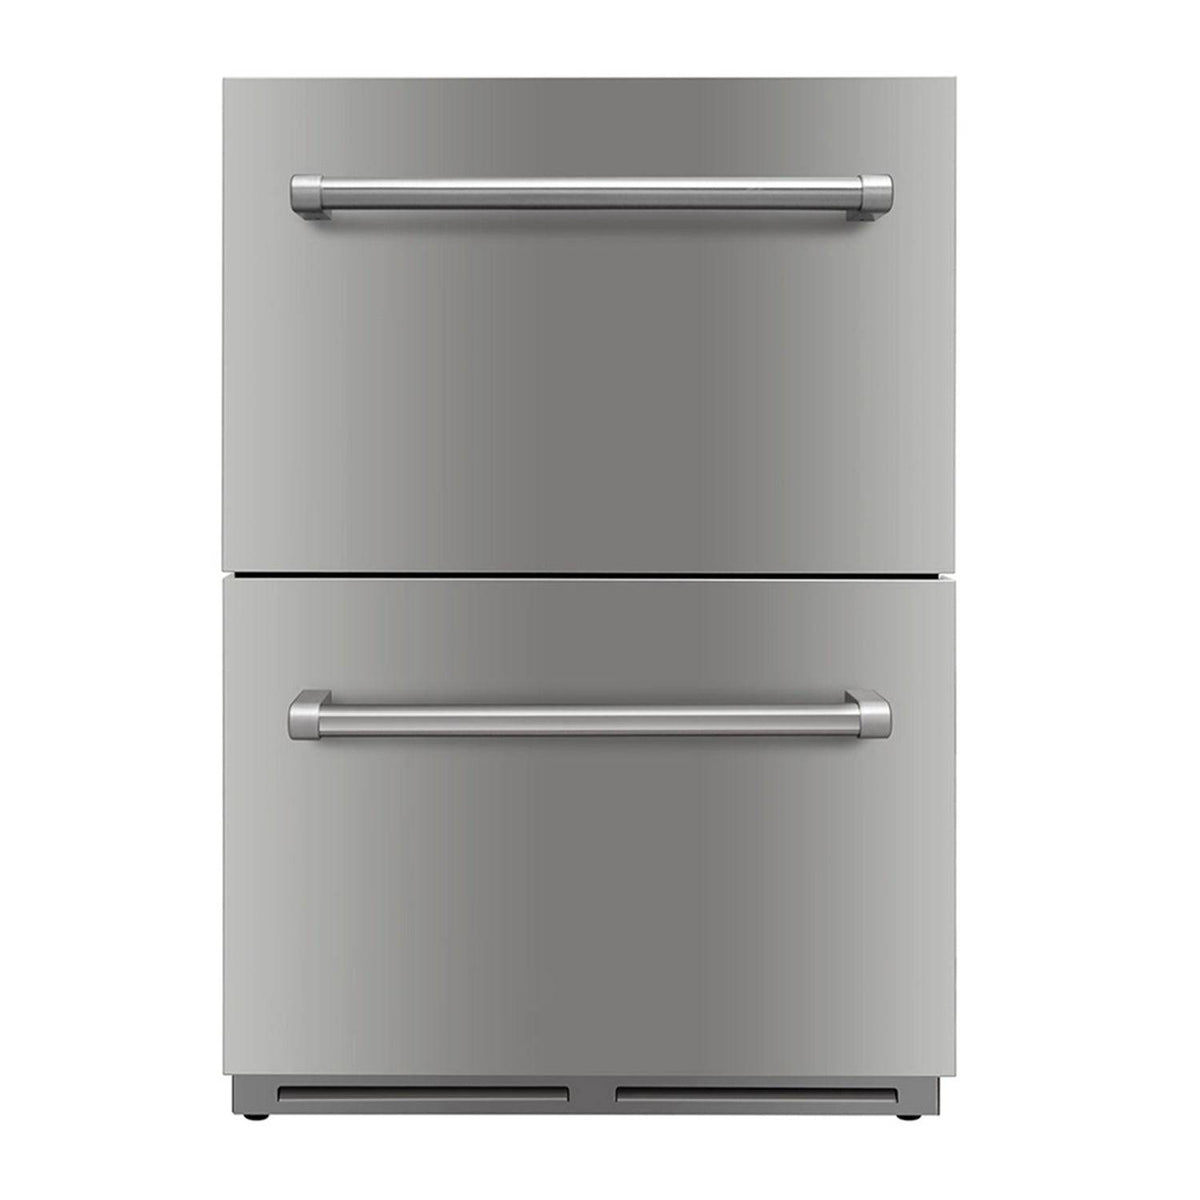 Fobest 24 Inch Stainless Steel Under Counter Refrigerator with 2 Drawers